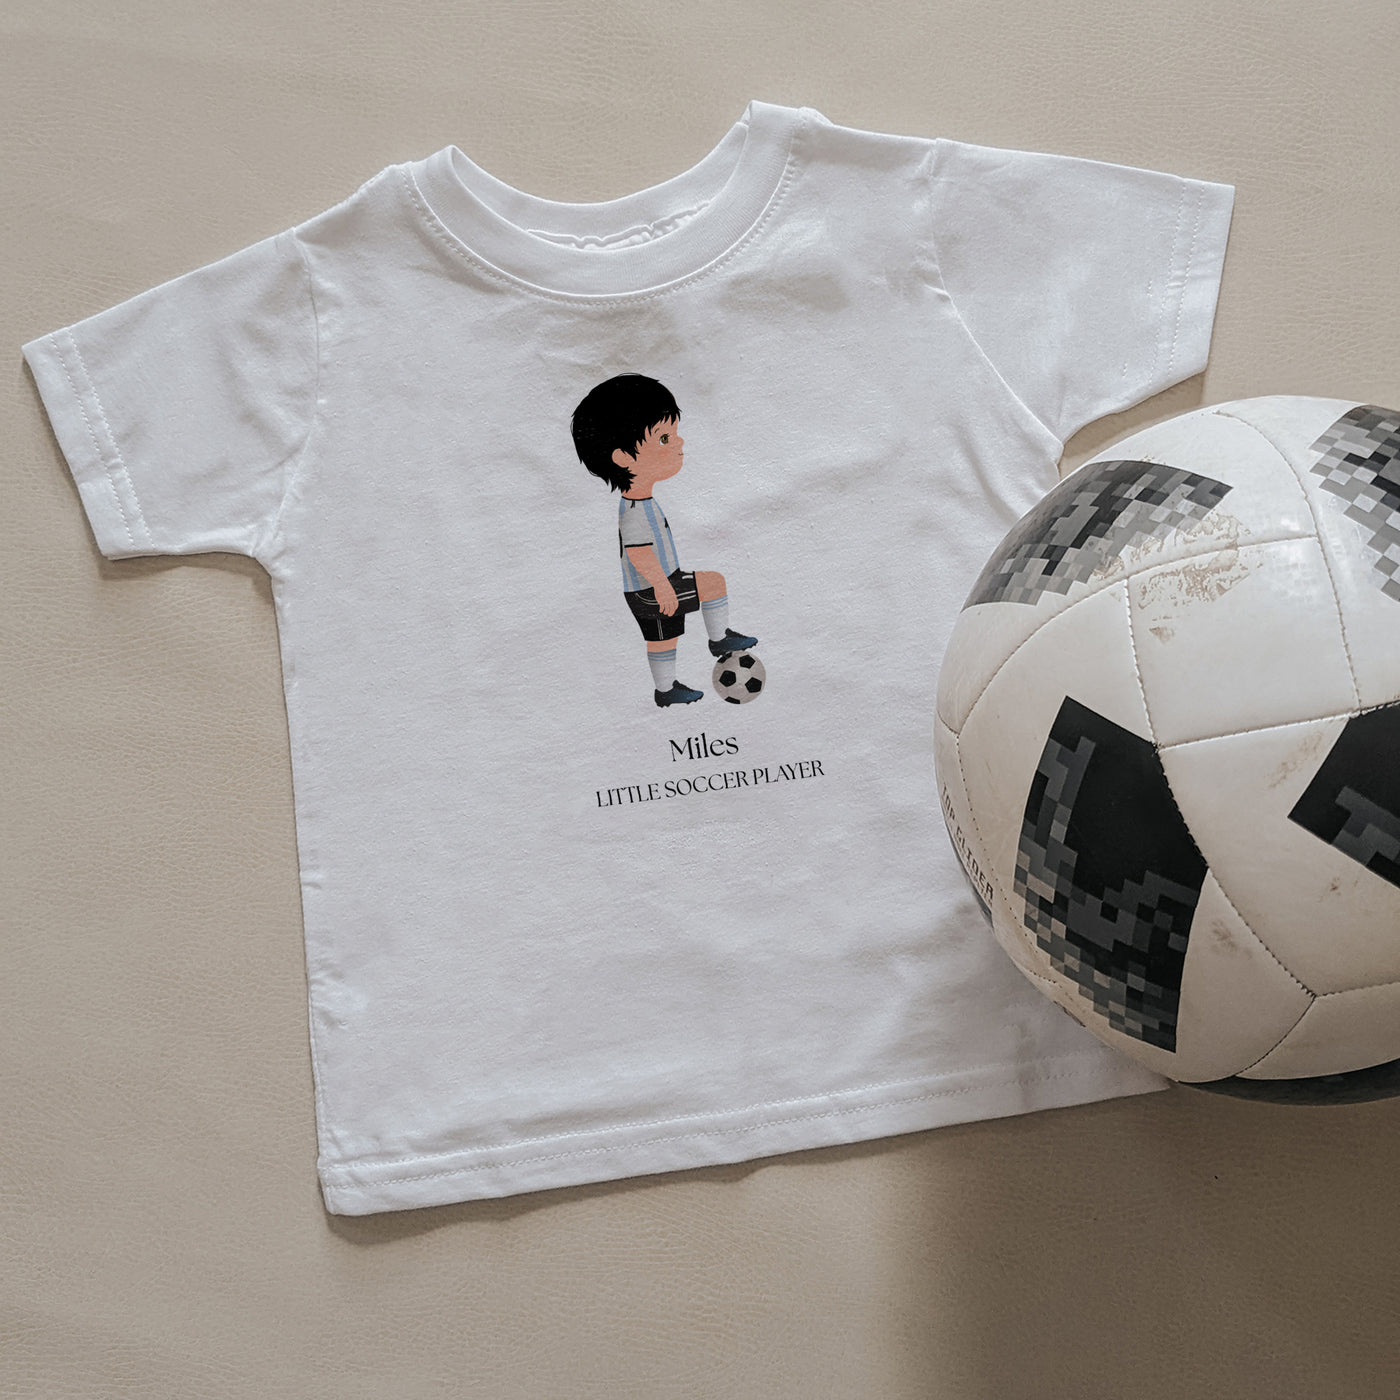 Little Soccer Player Boy Personalized T-shirt